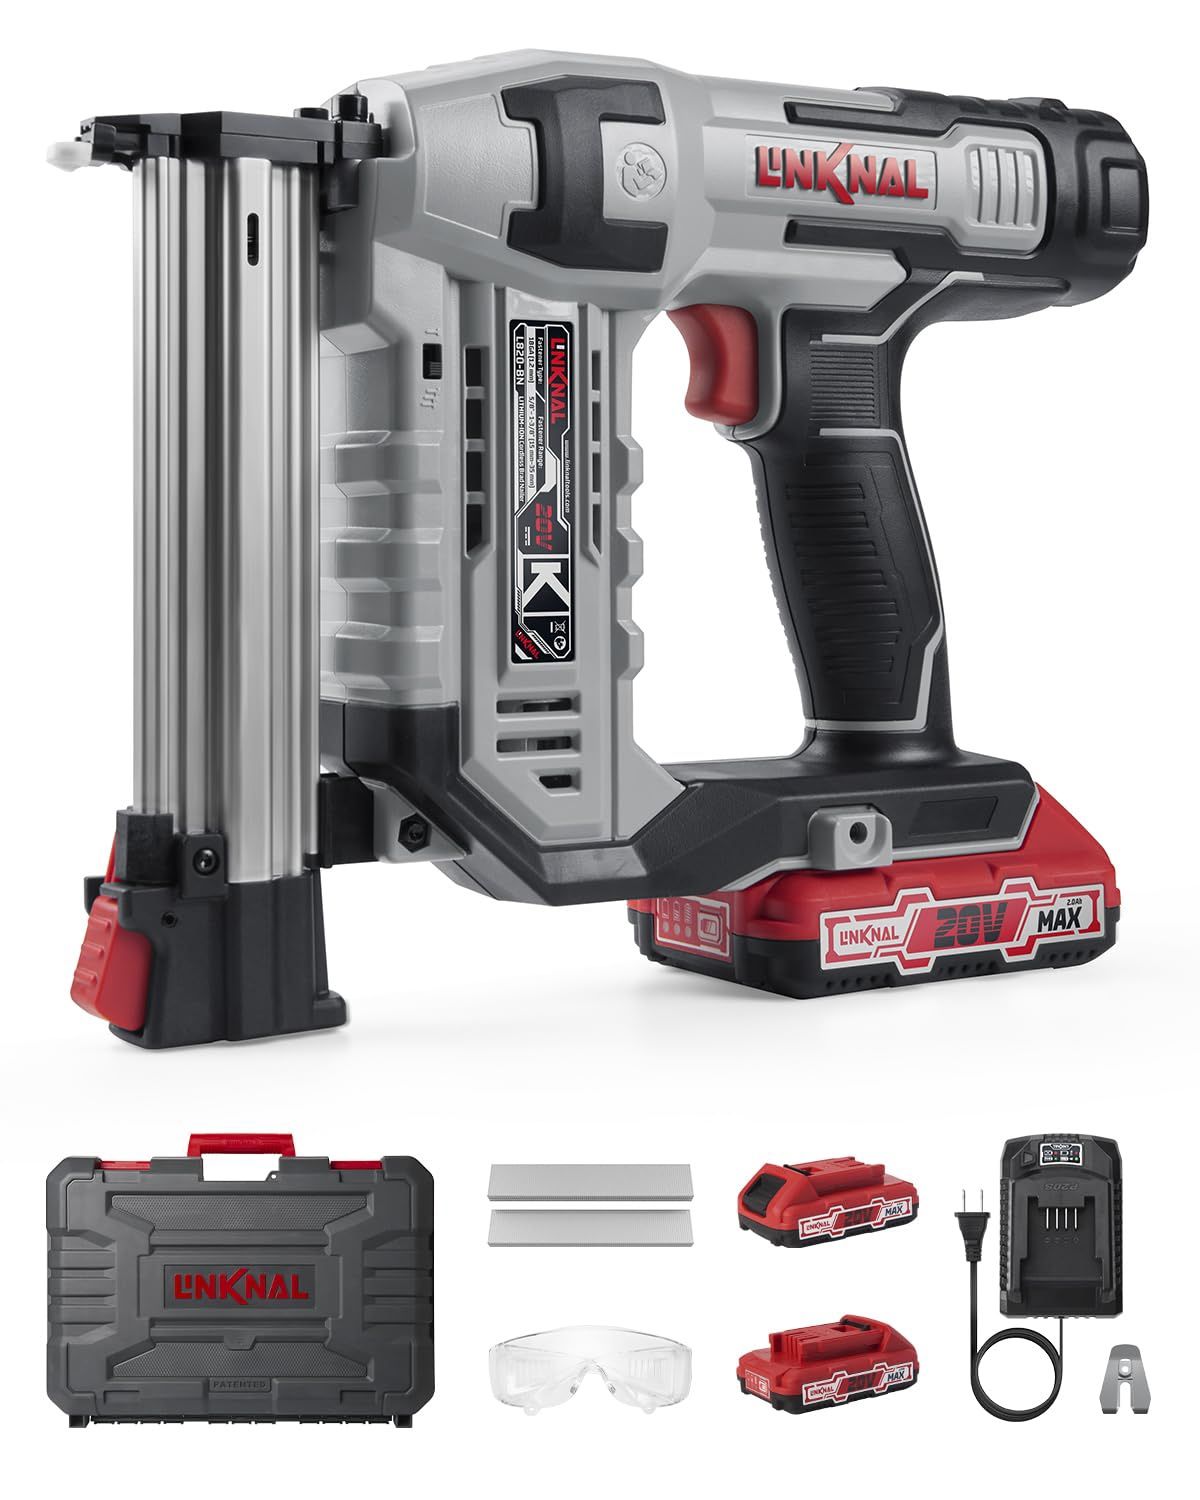 Electric Nail Gun, LINKNAL Cordless Brad Nailer Battery Powered,18 Gauge, 2×20V MAX Li-ion Batteries, Charger and 1000 Nails Included (L820-BN)